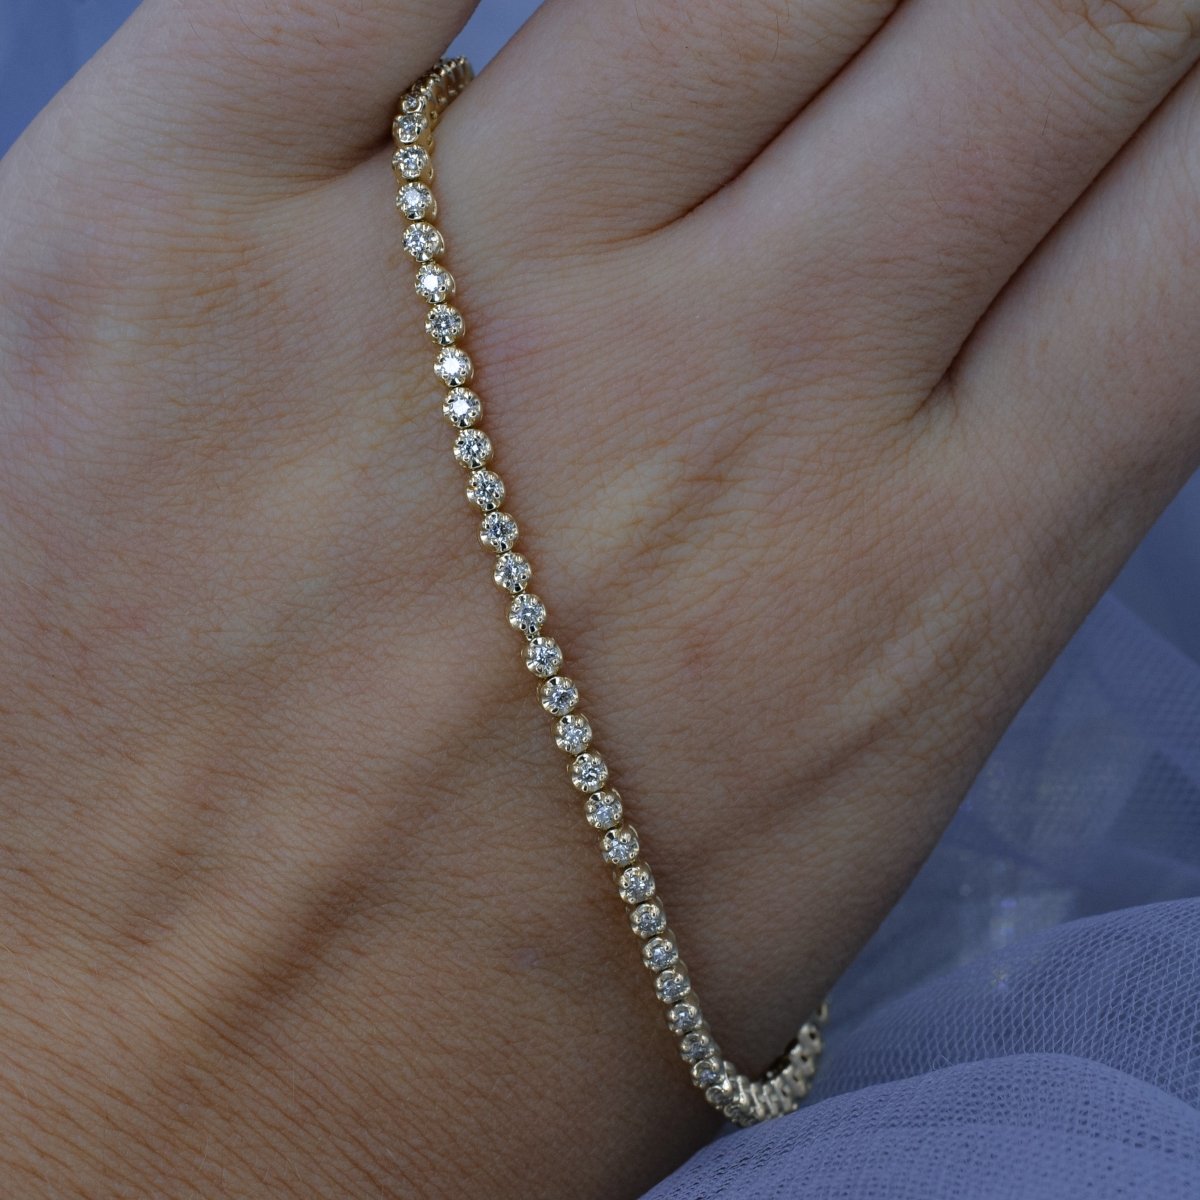 Special 1.00 CT Round Cut Diamond Tennis Bracelet in 14KT Yellow Gold - Primestyle.com